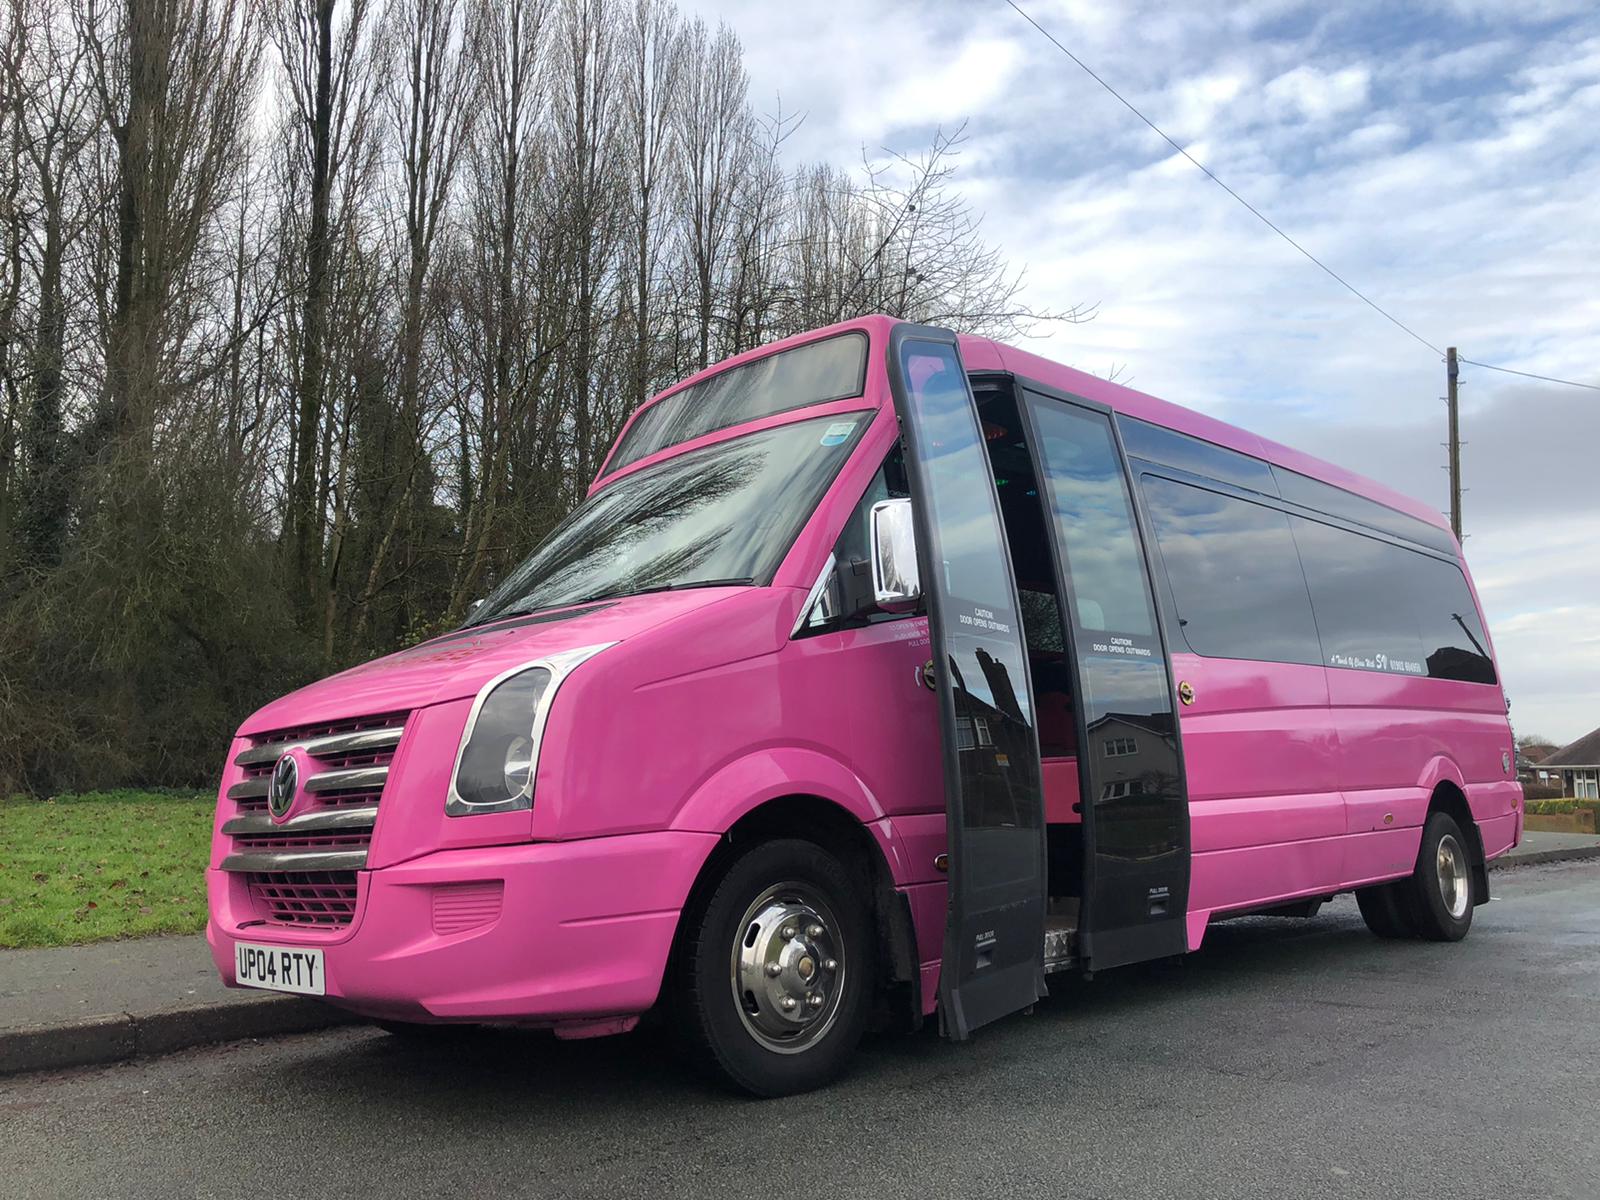 Party Bus Hire in Bristol: How to Plan the Perfect Night Out